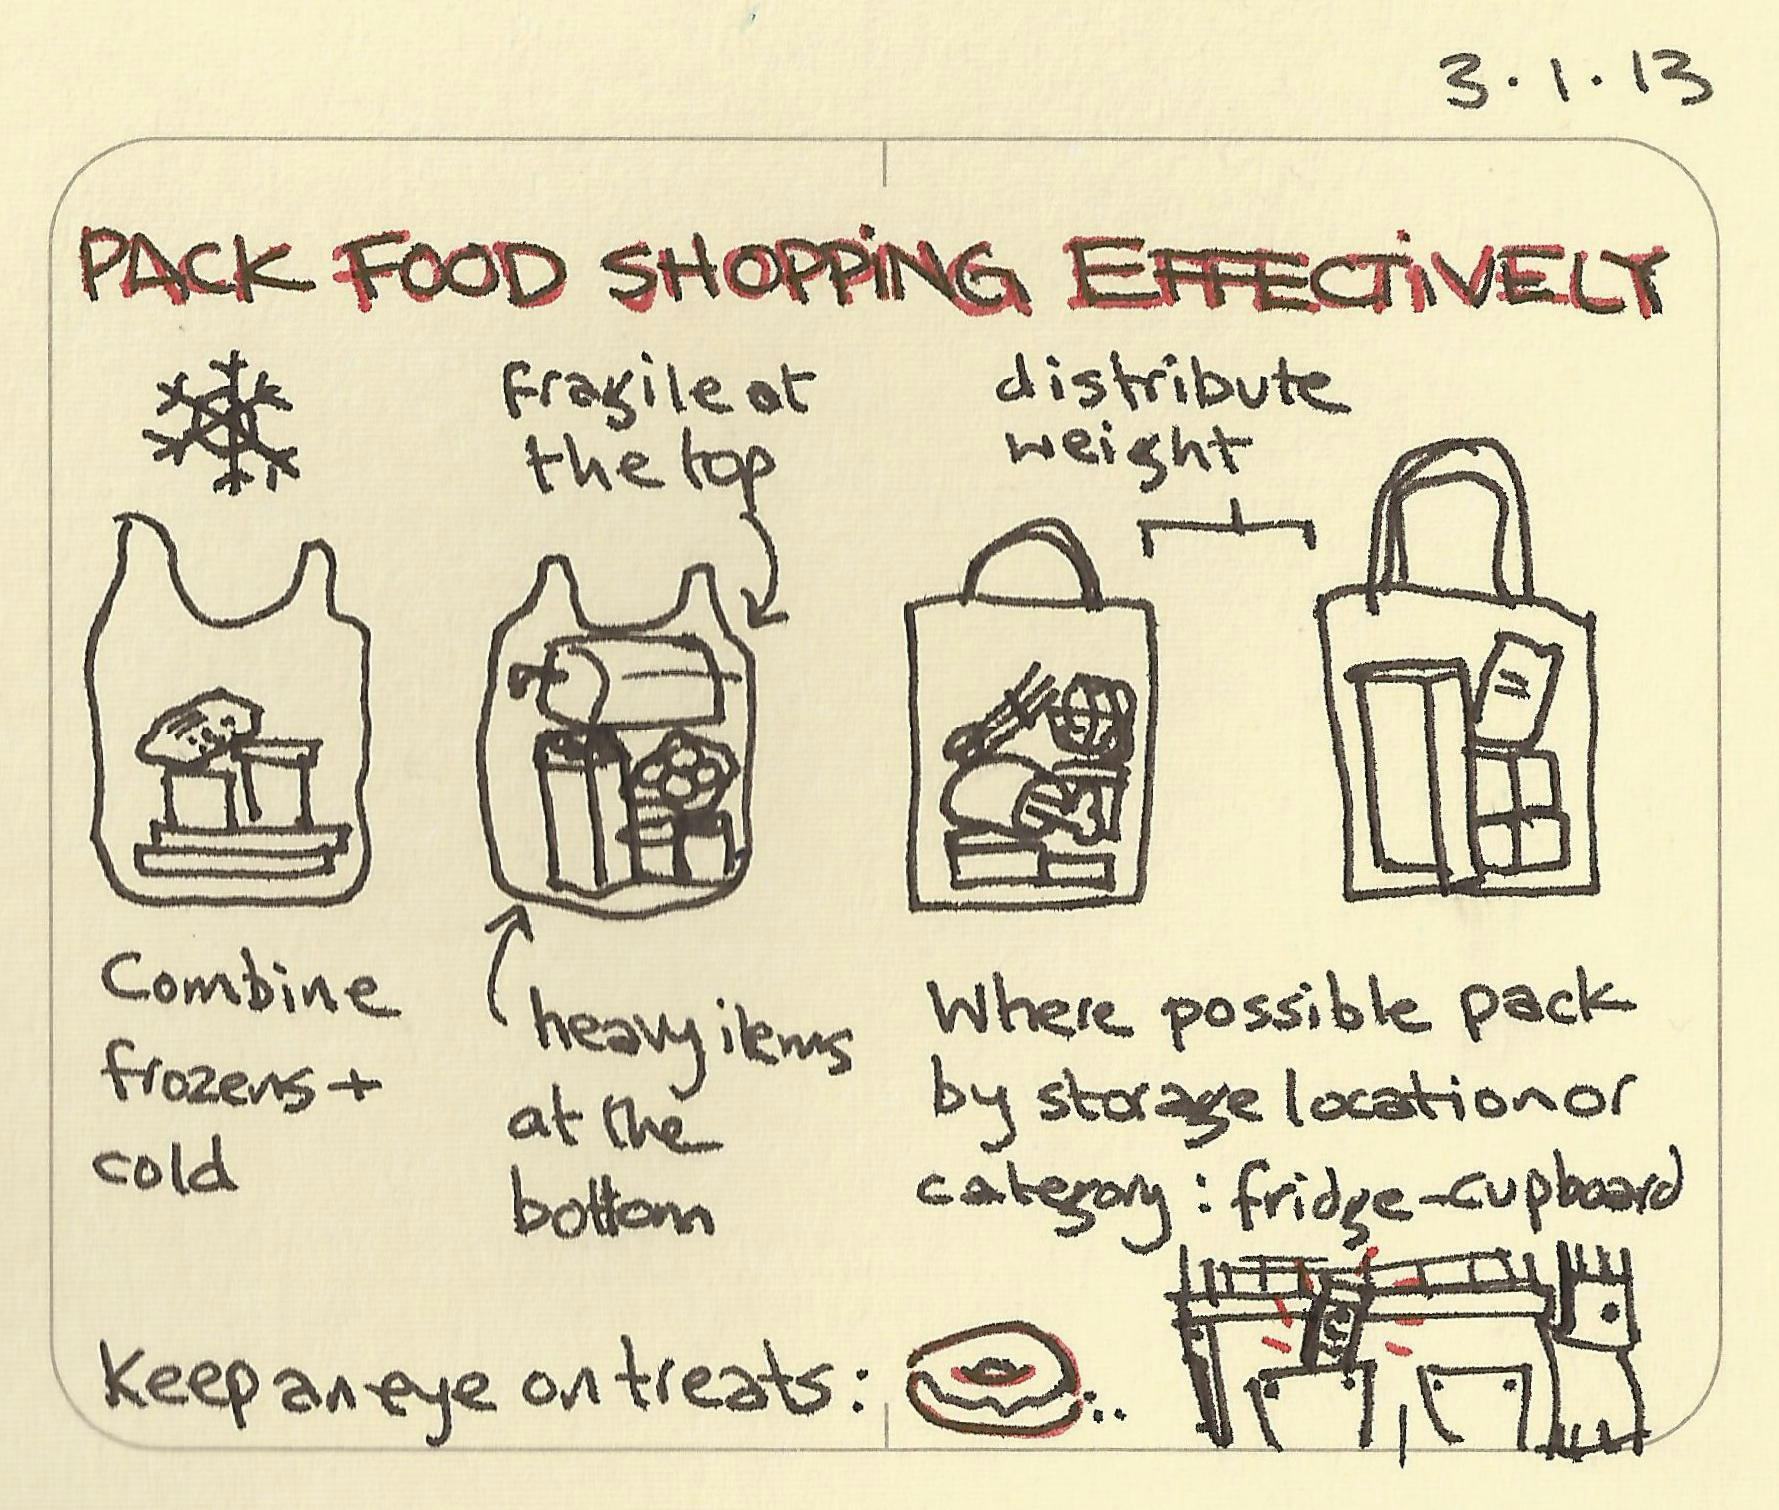 Pack food shopping effectively - Sketchplanations